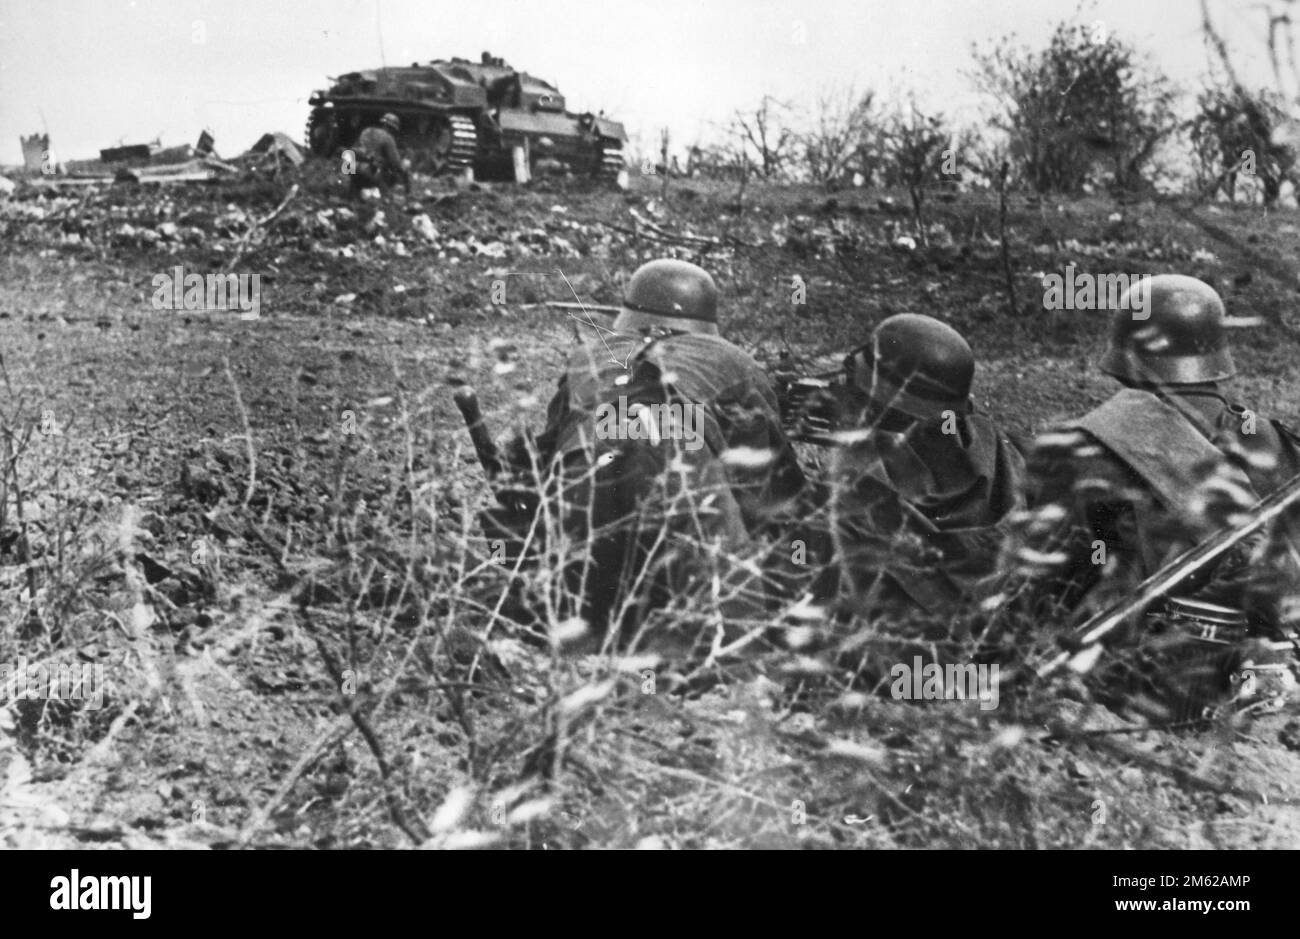 German infantry soldiers and a StuG III self-propelled gun in a fighting position ready to attack Stalingrad during the WW2 Battle of Stalingrad Stock Photo